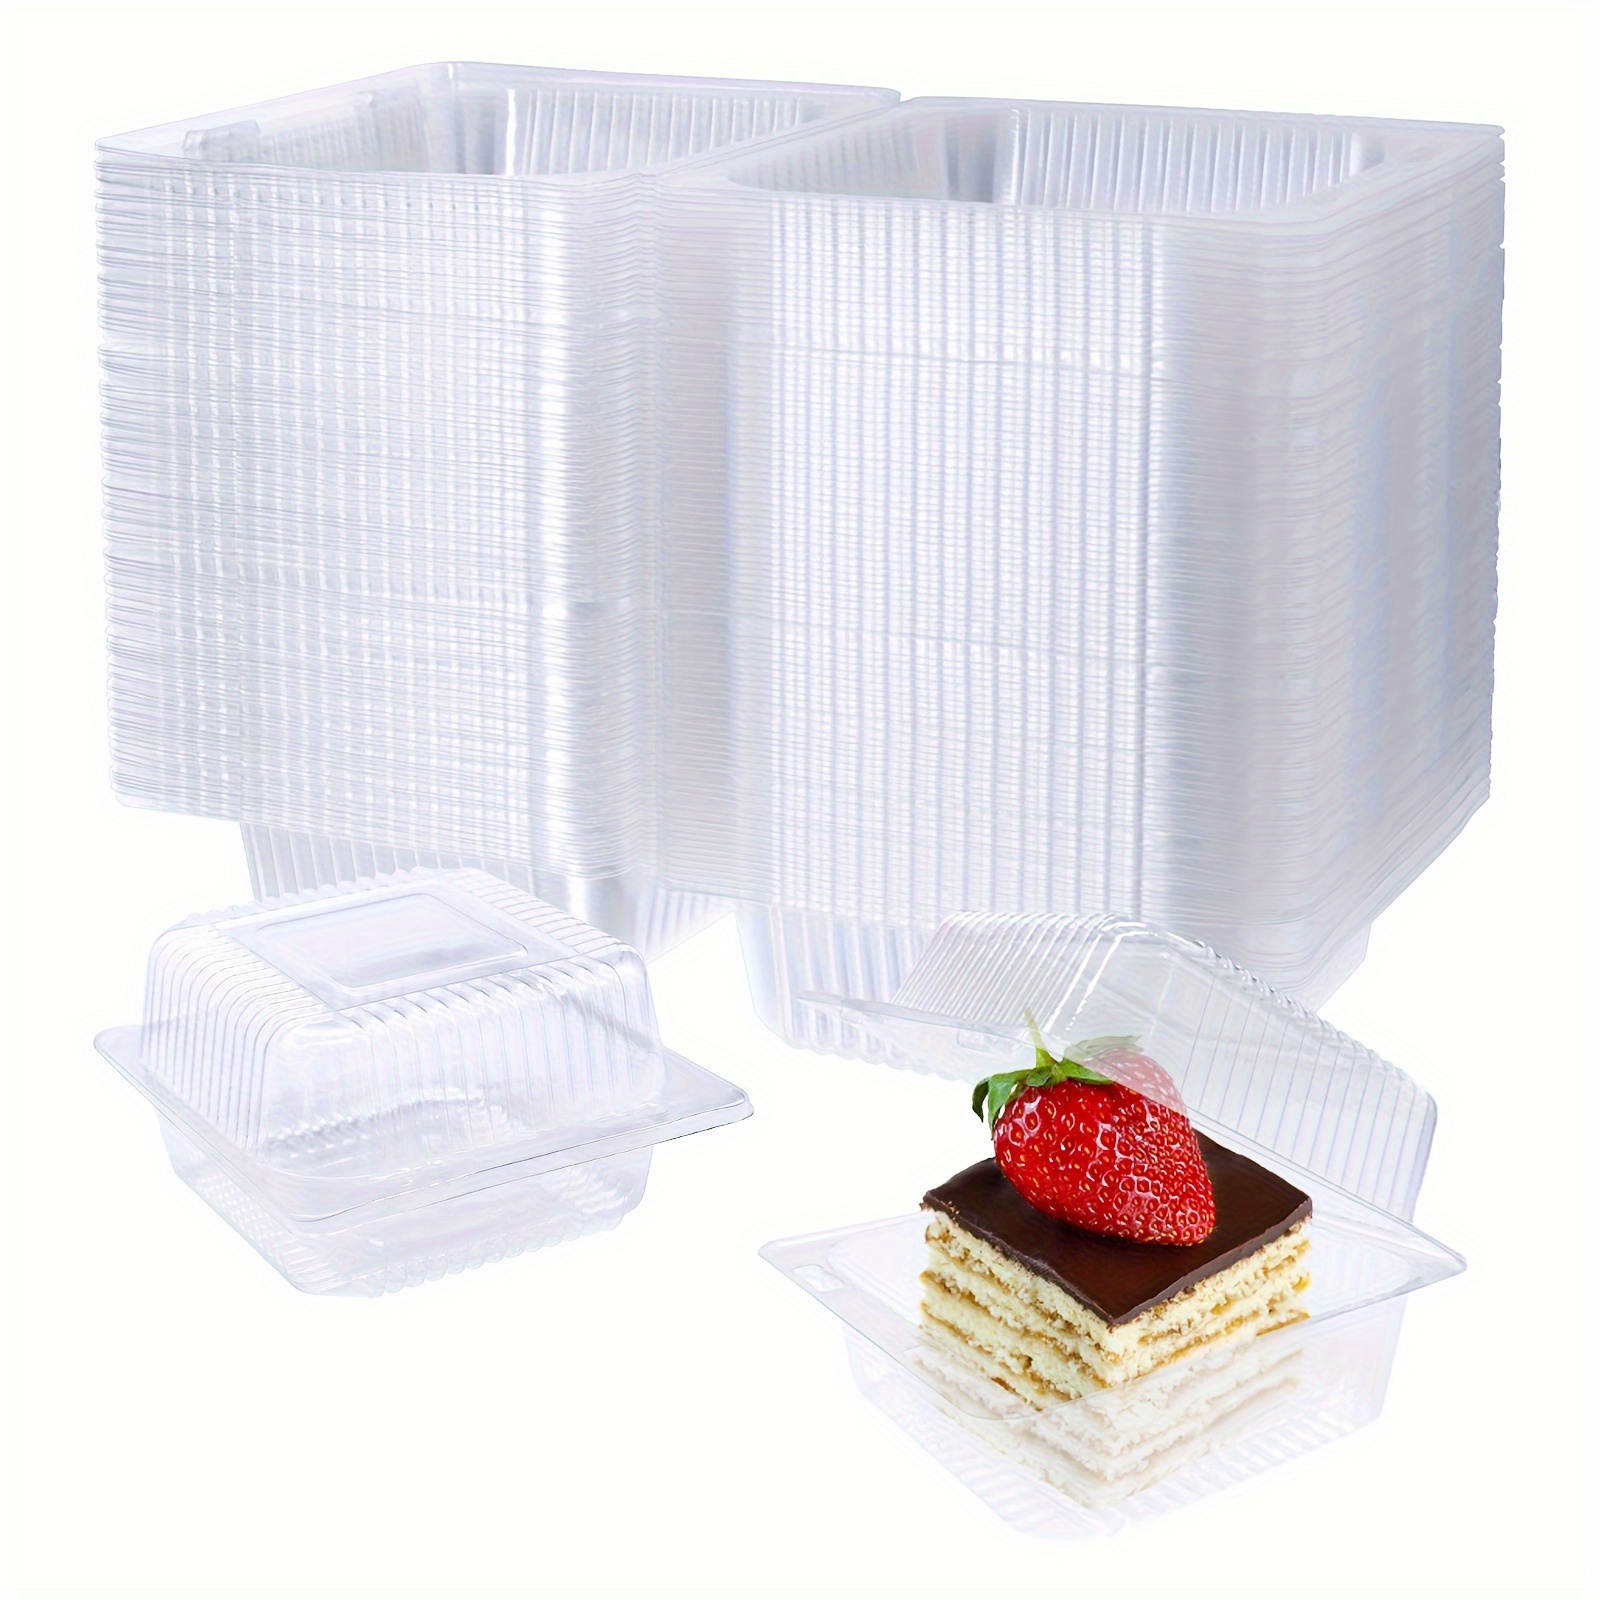 

100pcs Clear Plastic Square Hinged Food Containers, Disposable Take-out Boxes With Transparent Lids For Cake , Clamshell Pastry, Salad, Dessert Carry-out Trays, Food Packaging Supplies